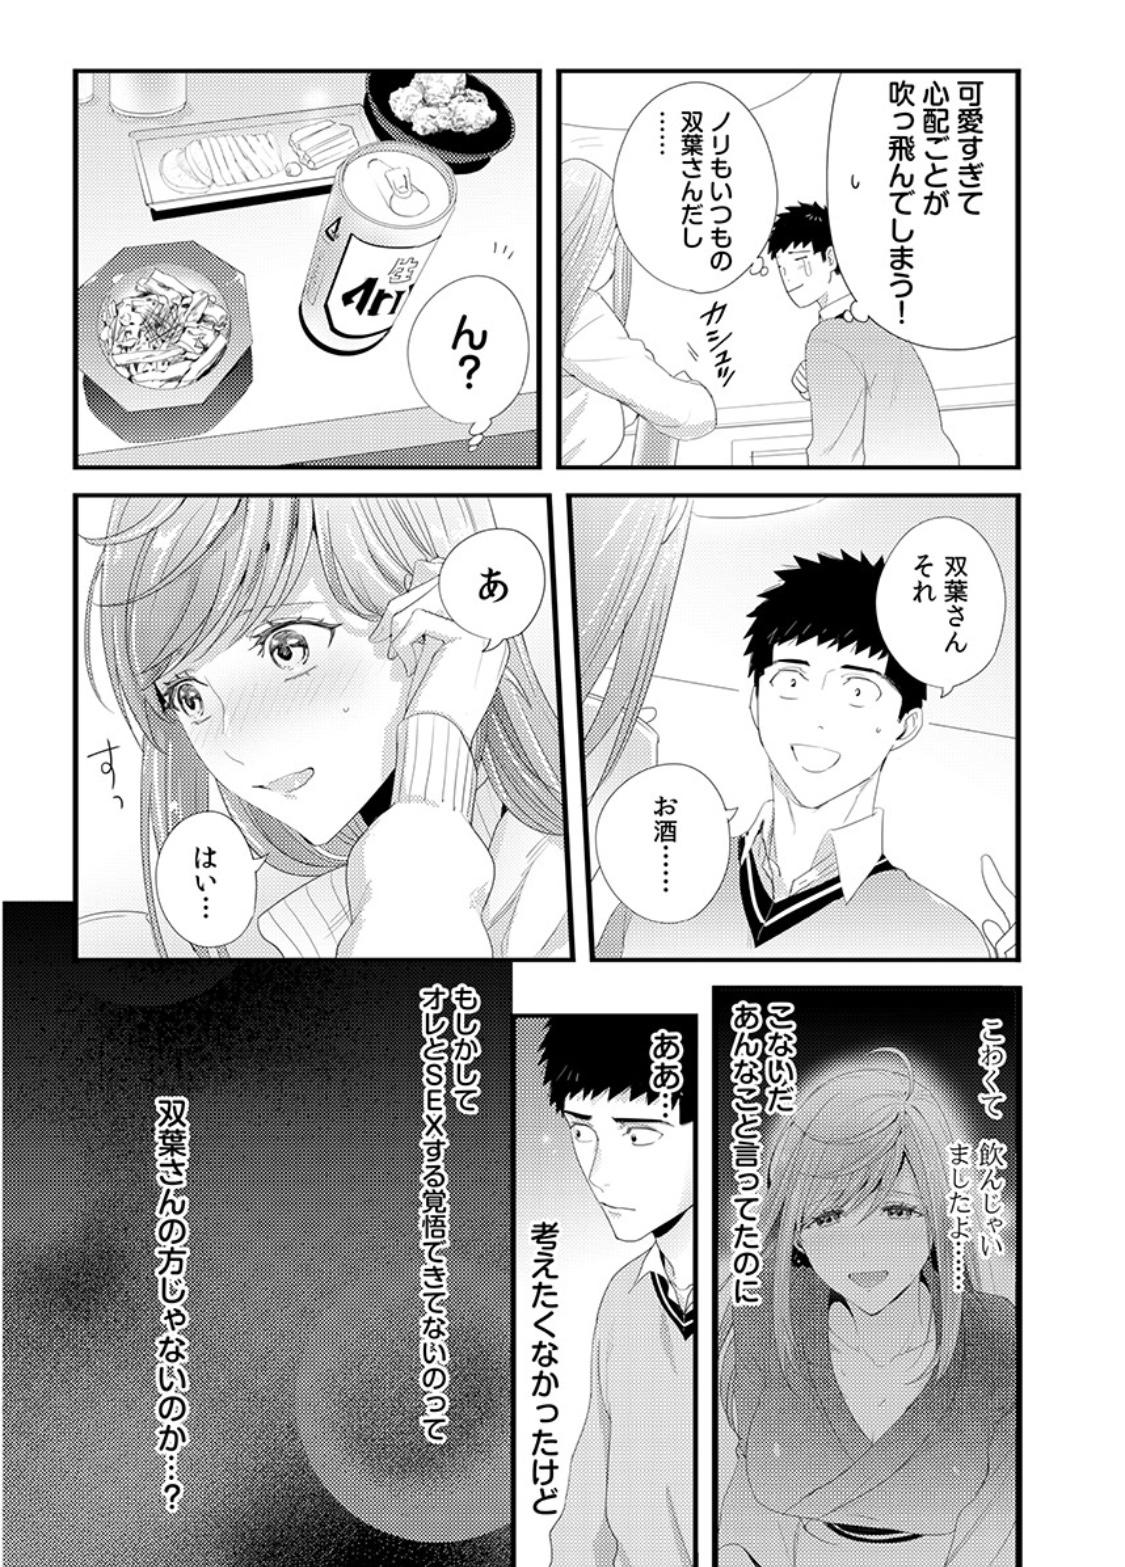 Please Let Me Hold You Futaba-San! Ch. 1+2 41